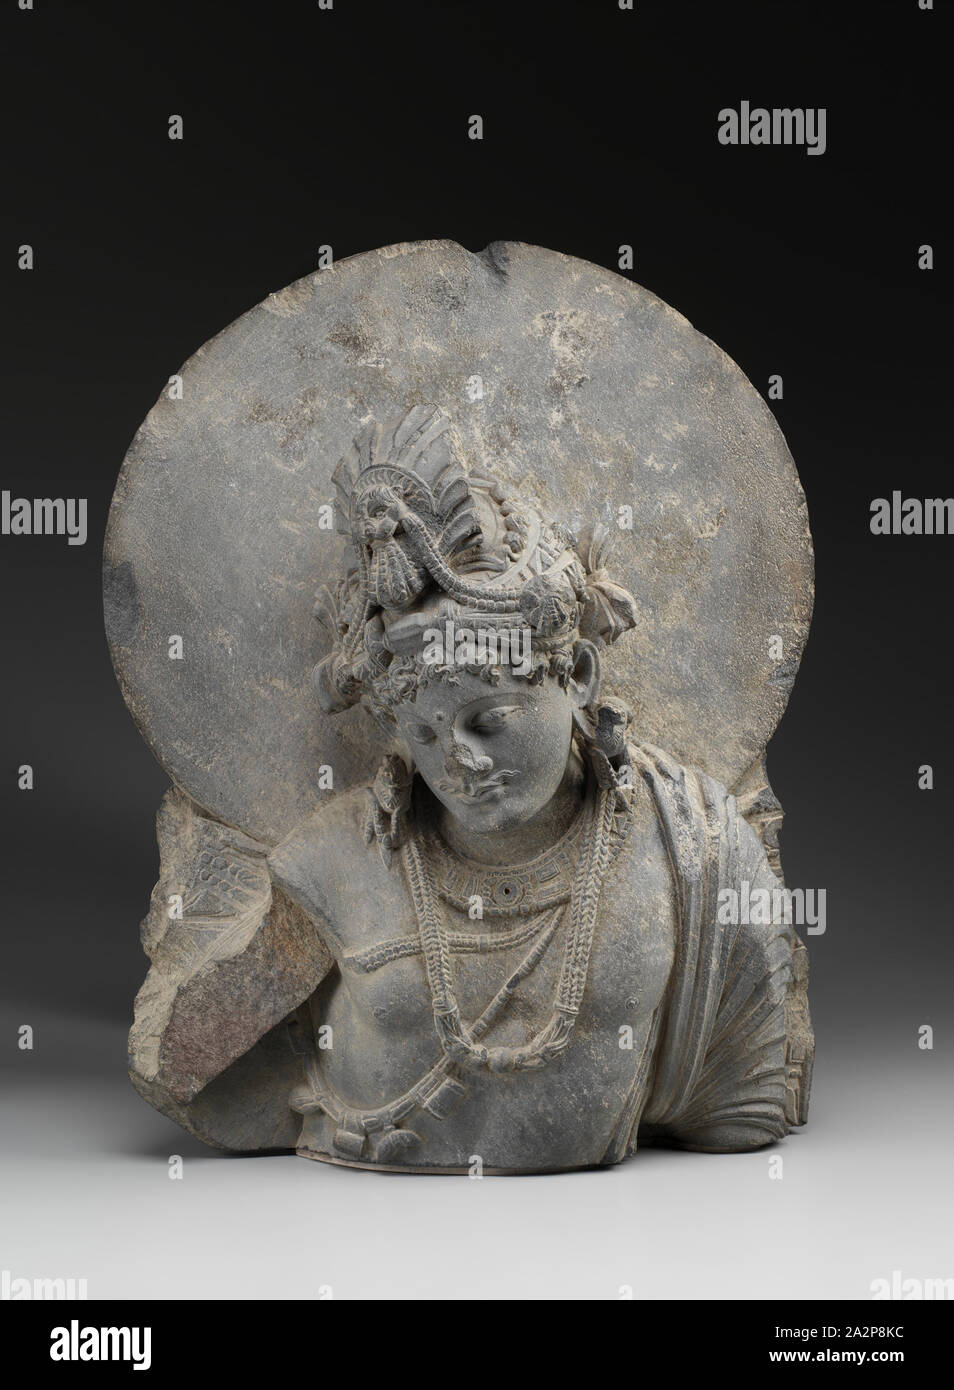 Unknown (Gandharan), Bodhisattva, between 200 and 400, Gray schist, Overall: 20 1/2 × 16 1/2 × 7 3/4 inches (52.1 × 41.9 × 19.7 cm Stock Photo